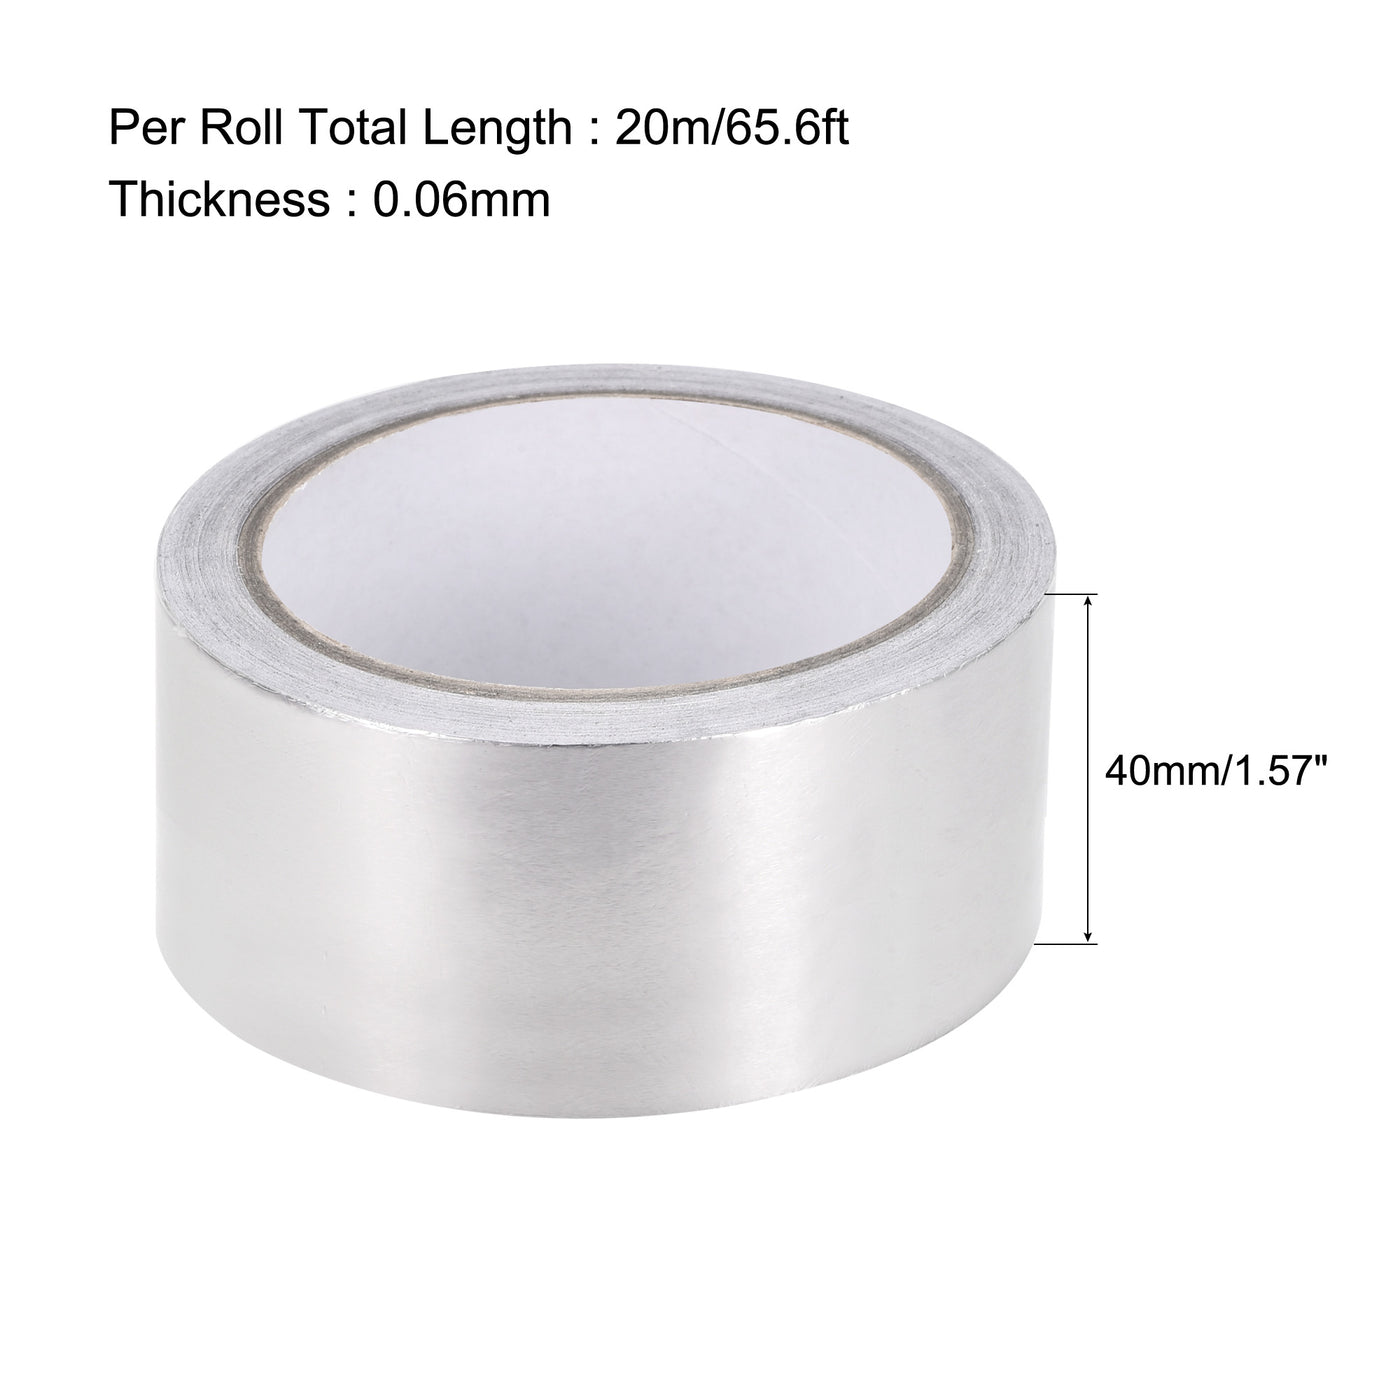 uxcell Uxcell 40mm Aluminum Foil Tape High Temperature Tape for HVAC, Sealing, Patching Hot and Cold Air Ducts Single Sided Adhesive Tape 20m/65ft